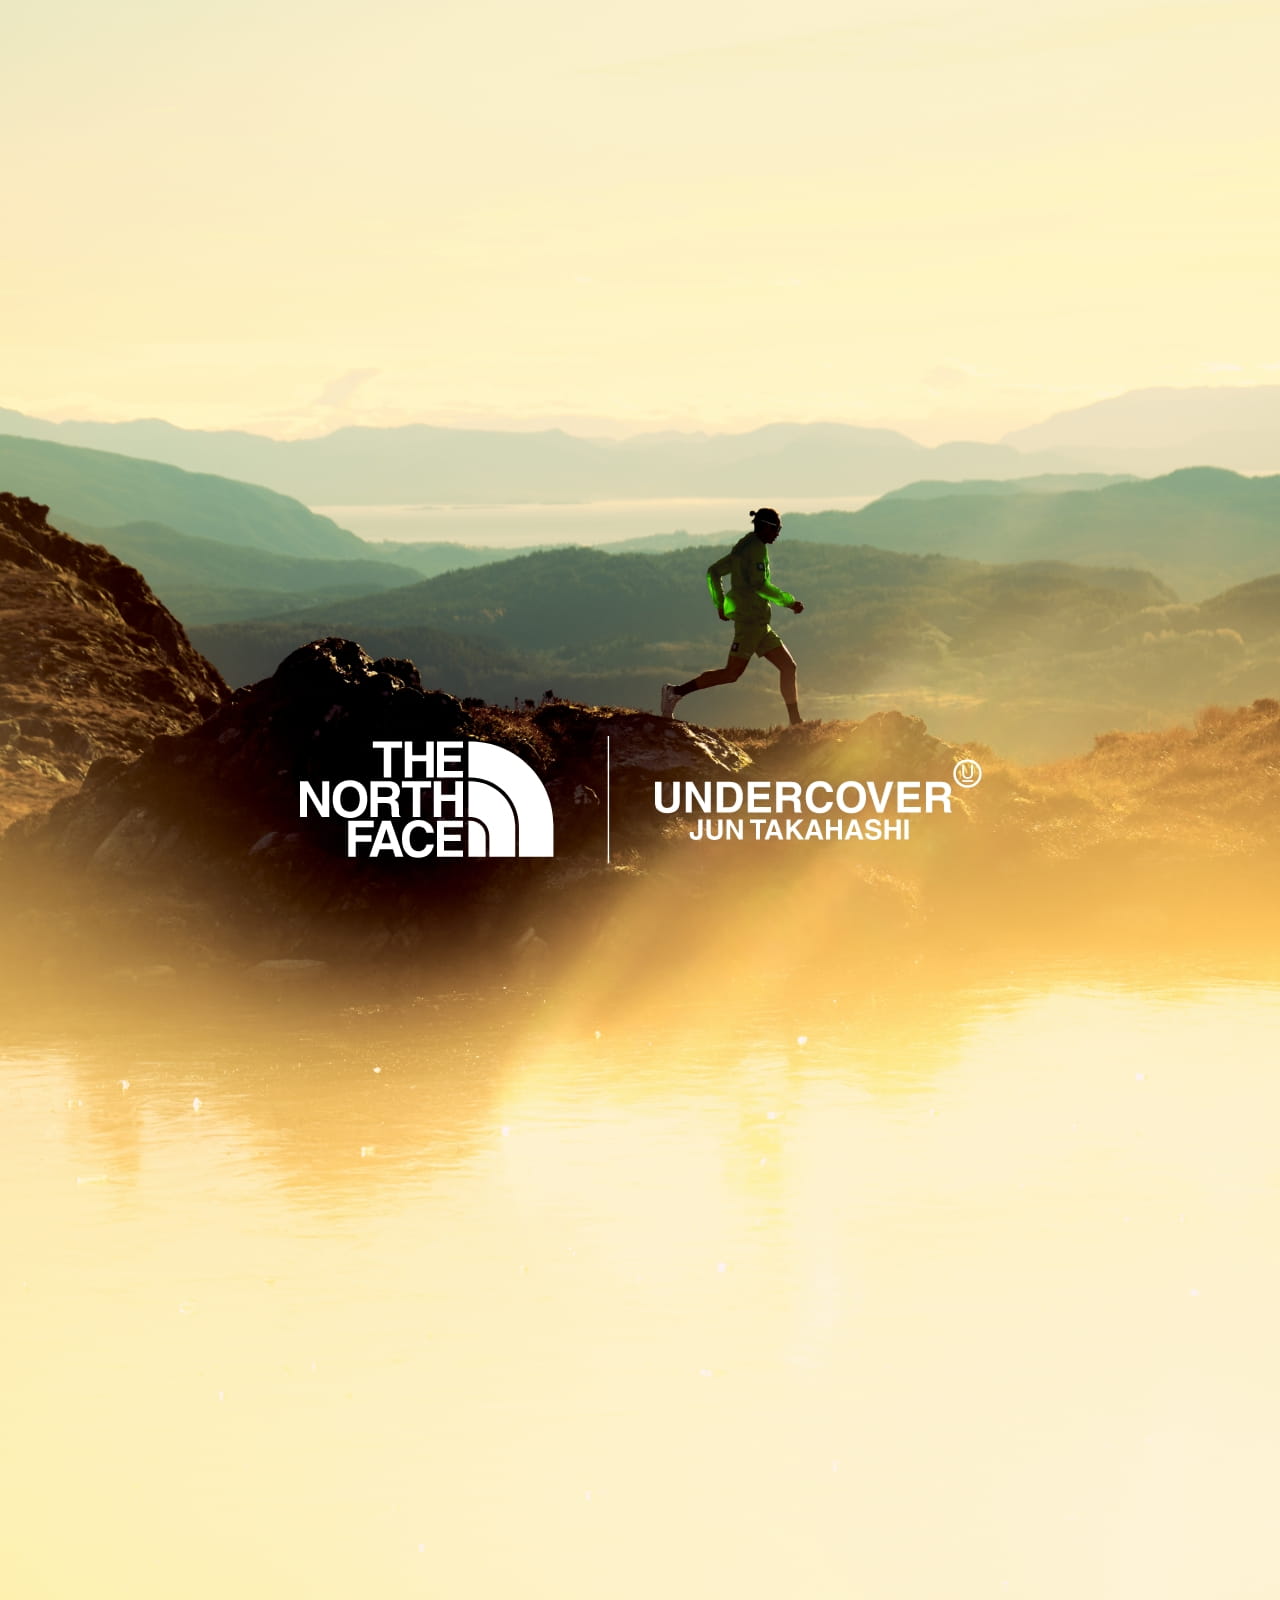 THE NORTH FACE X UNDERCOVER